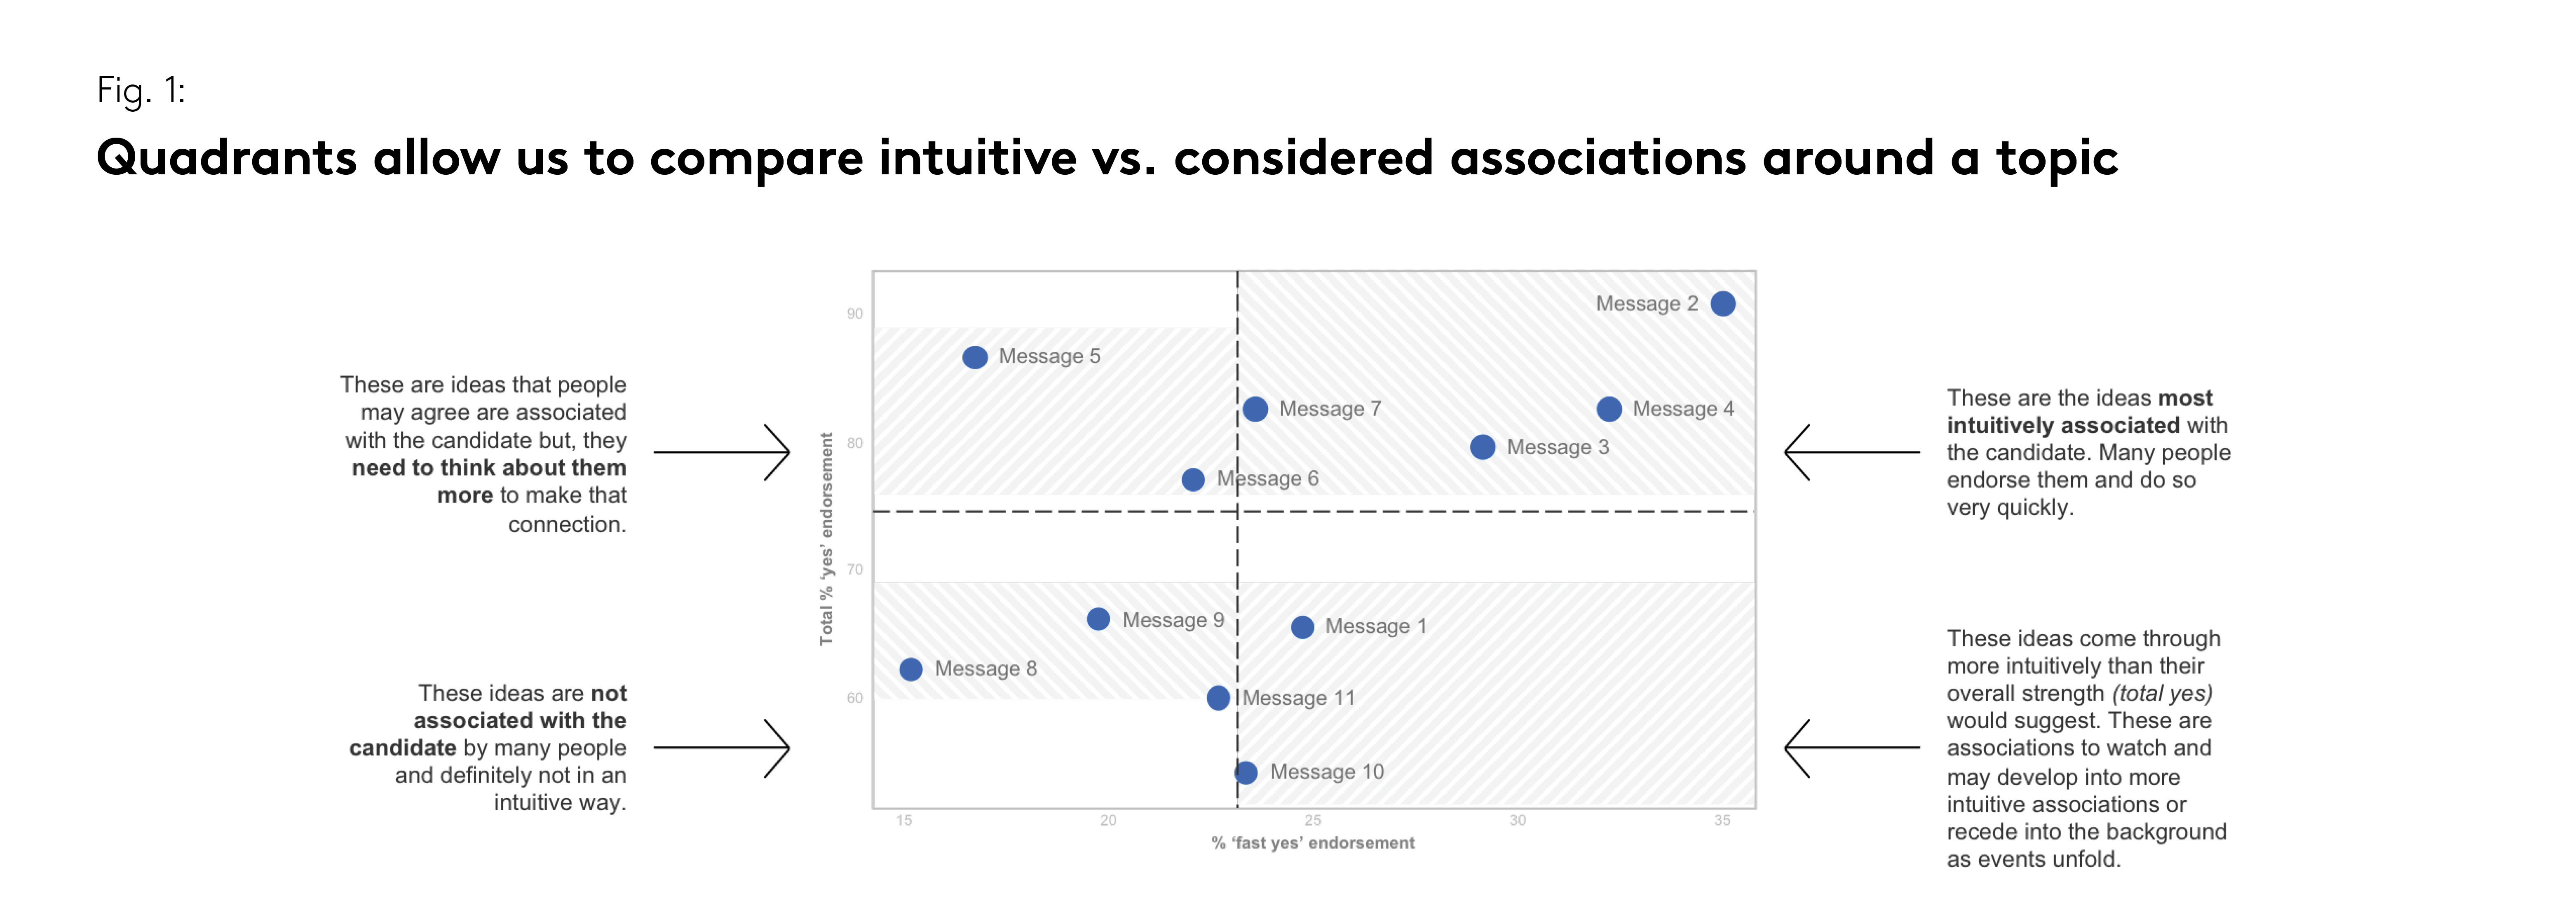 Comparing intuitive and considered associates